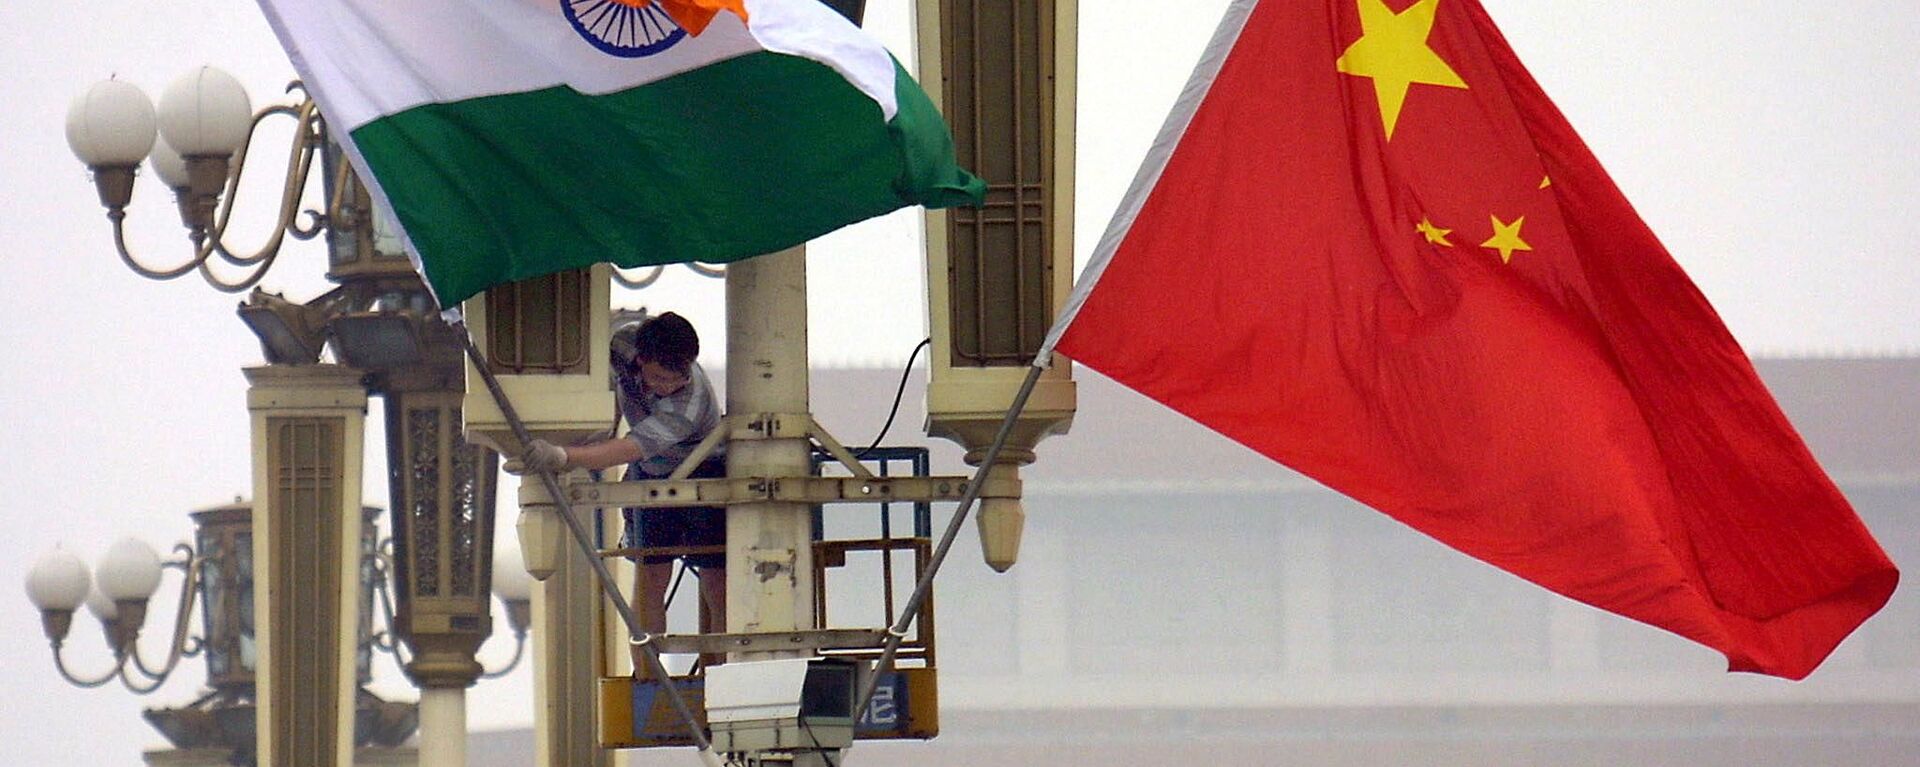 Workers put up the Indian flag (L) alongside the Chinese flag on Tiananmen Square in Beijing, 22 June 2003 - Sputnik International, 1920, 30.08.2022